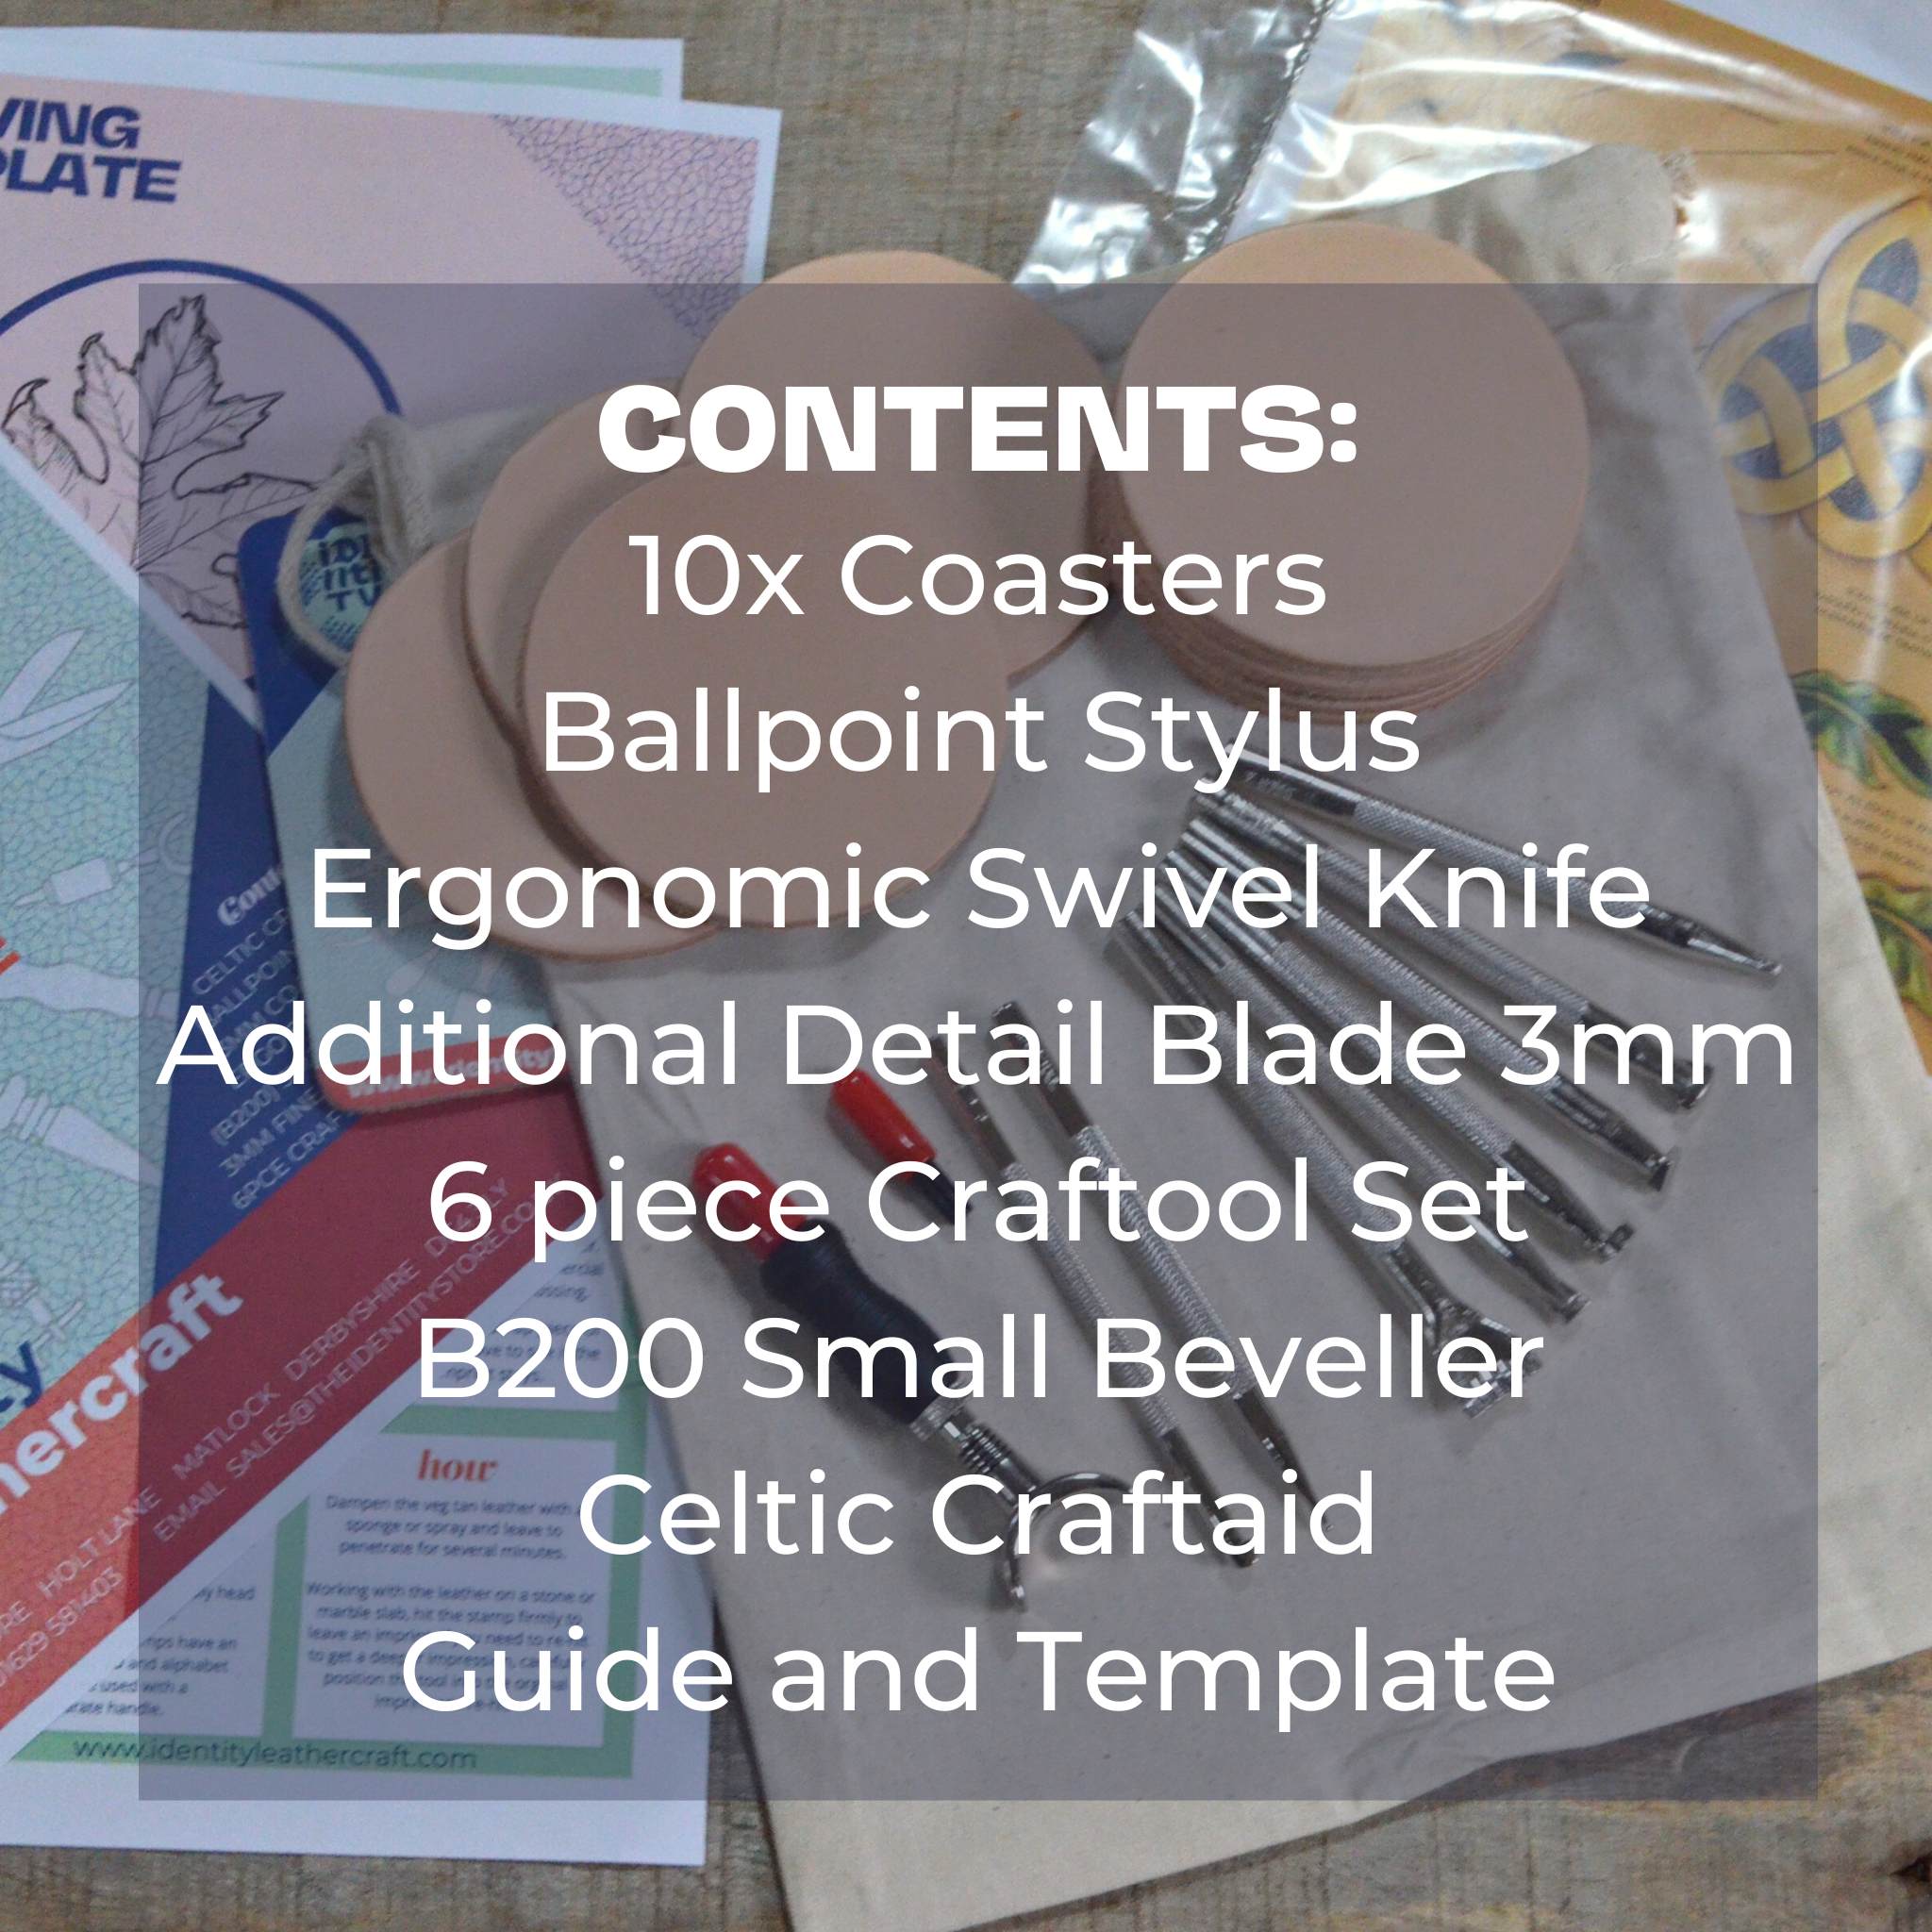 This comprehensive pack will give you a great start for carving and tooling leather and comes with Celtic craftaid pattern.